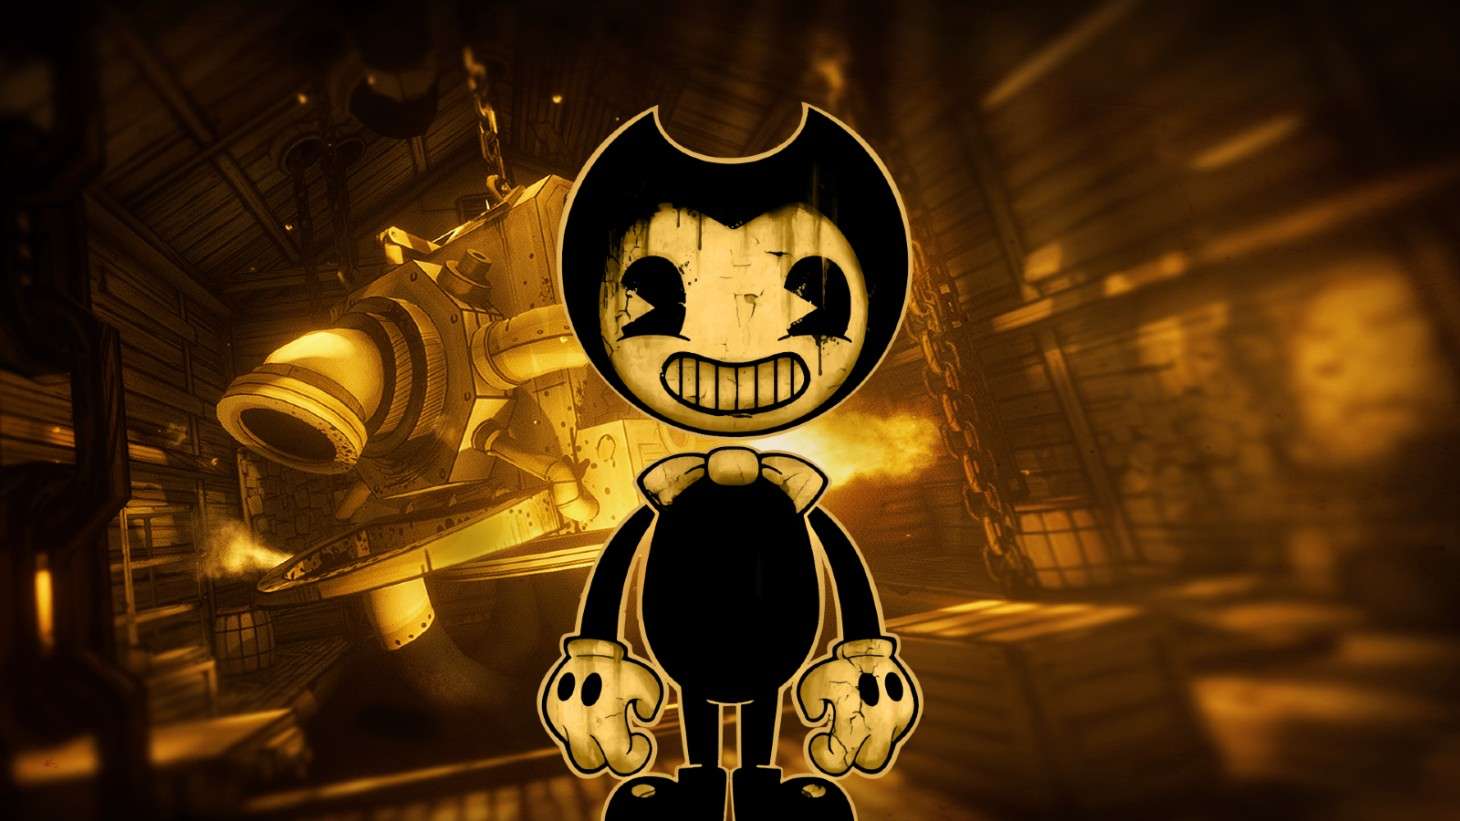 Key art for the Bendy and the Ink Machine movie